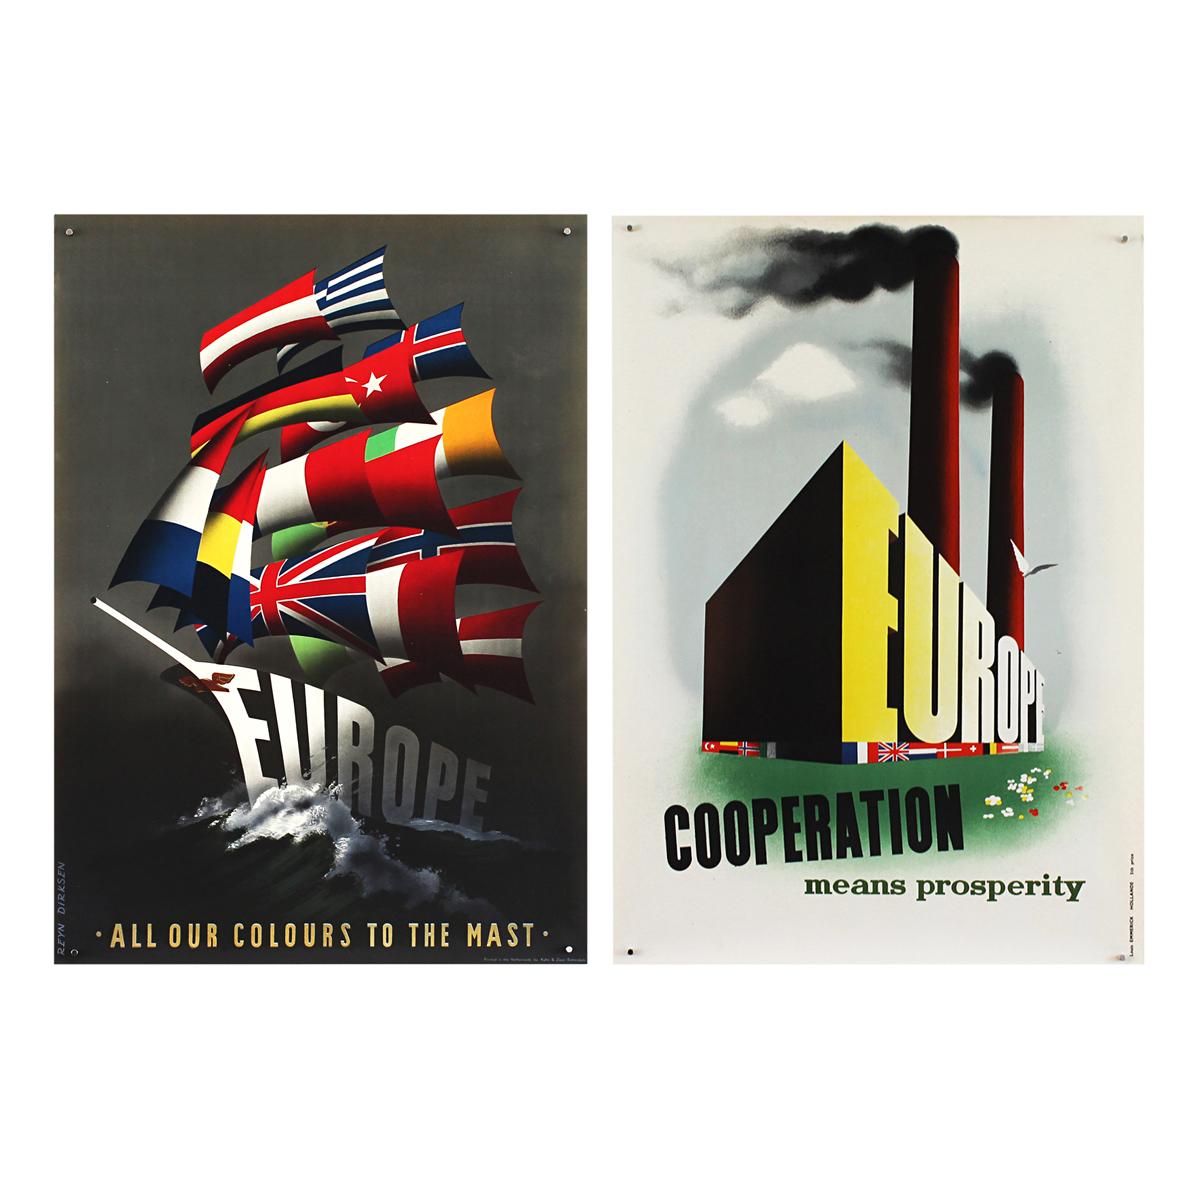 25 Original Marshall Plan Posters, a Complete Collection of the Contest Winners 5